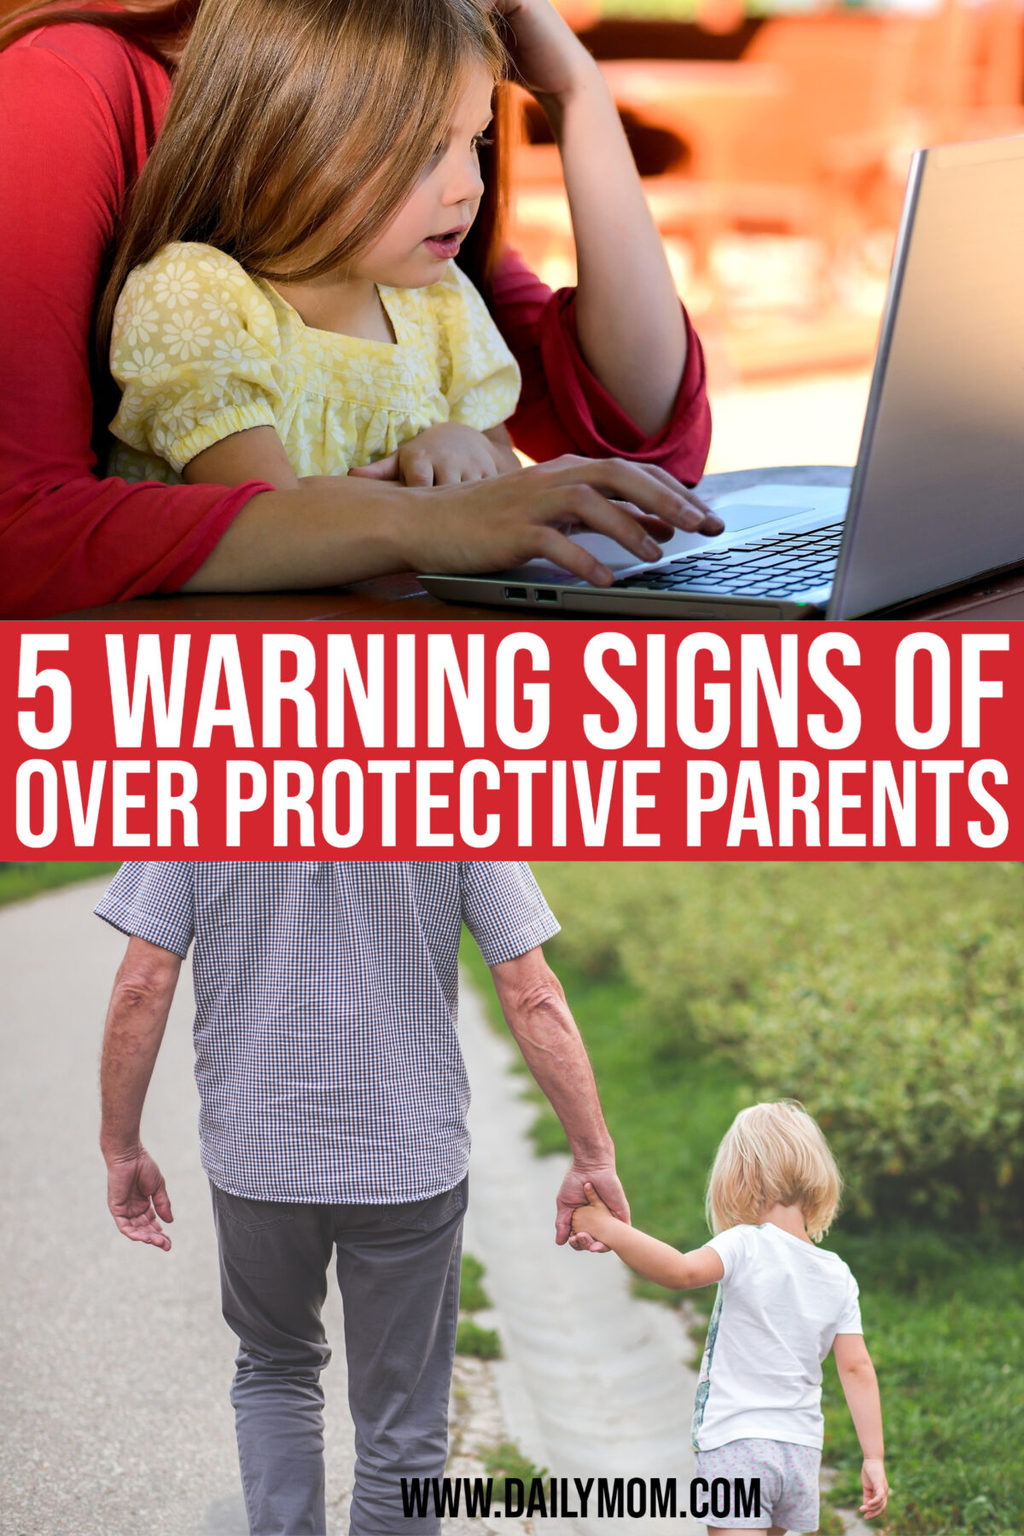 Are You An Overprotective Parent – 5 Warning Signs Says You Might Be